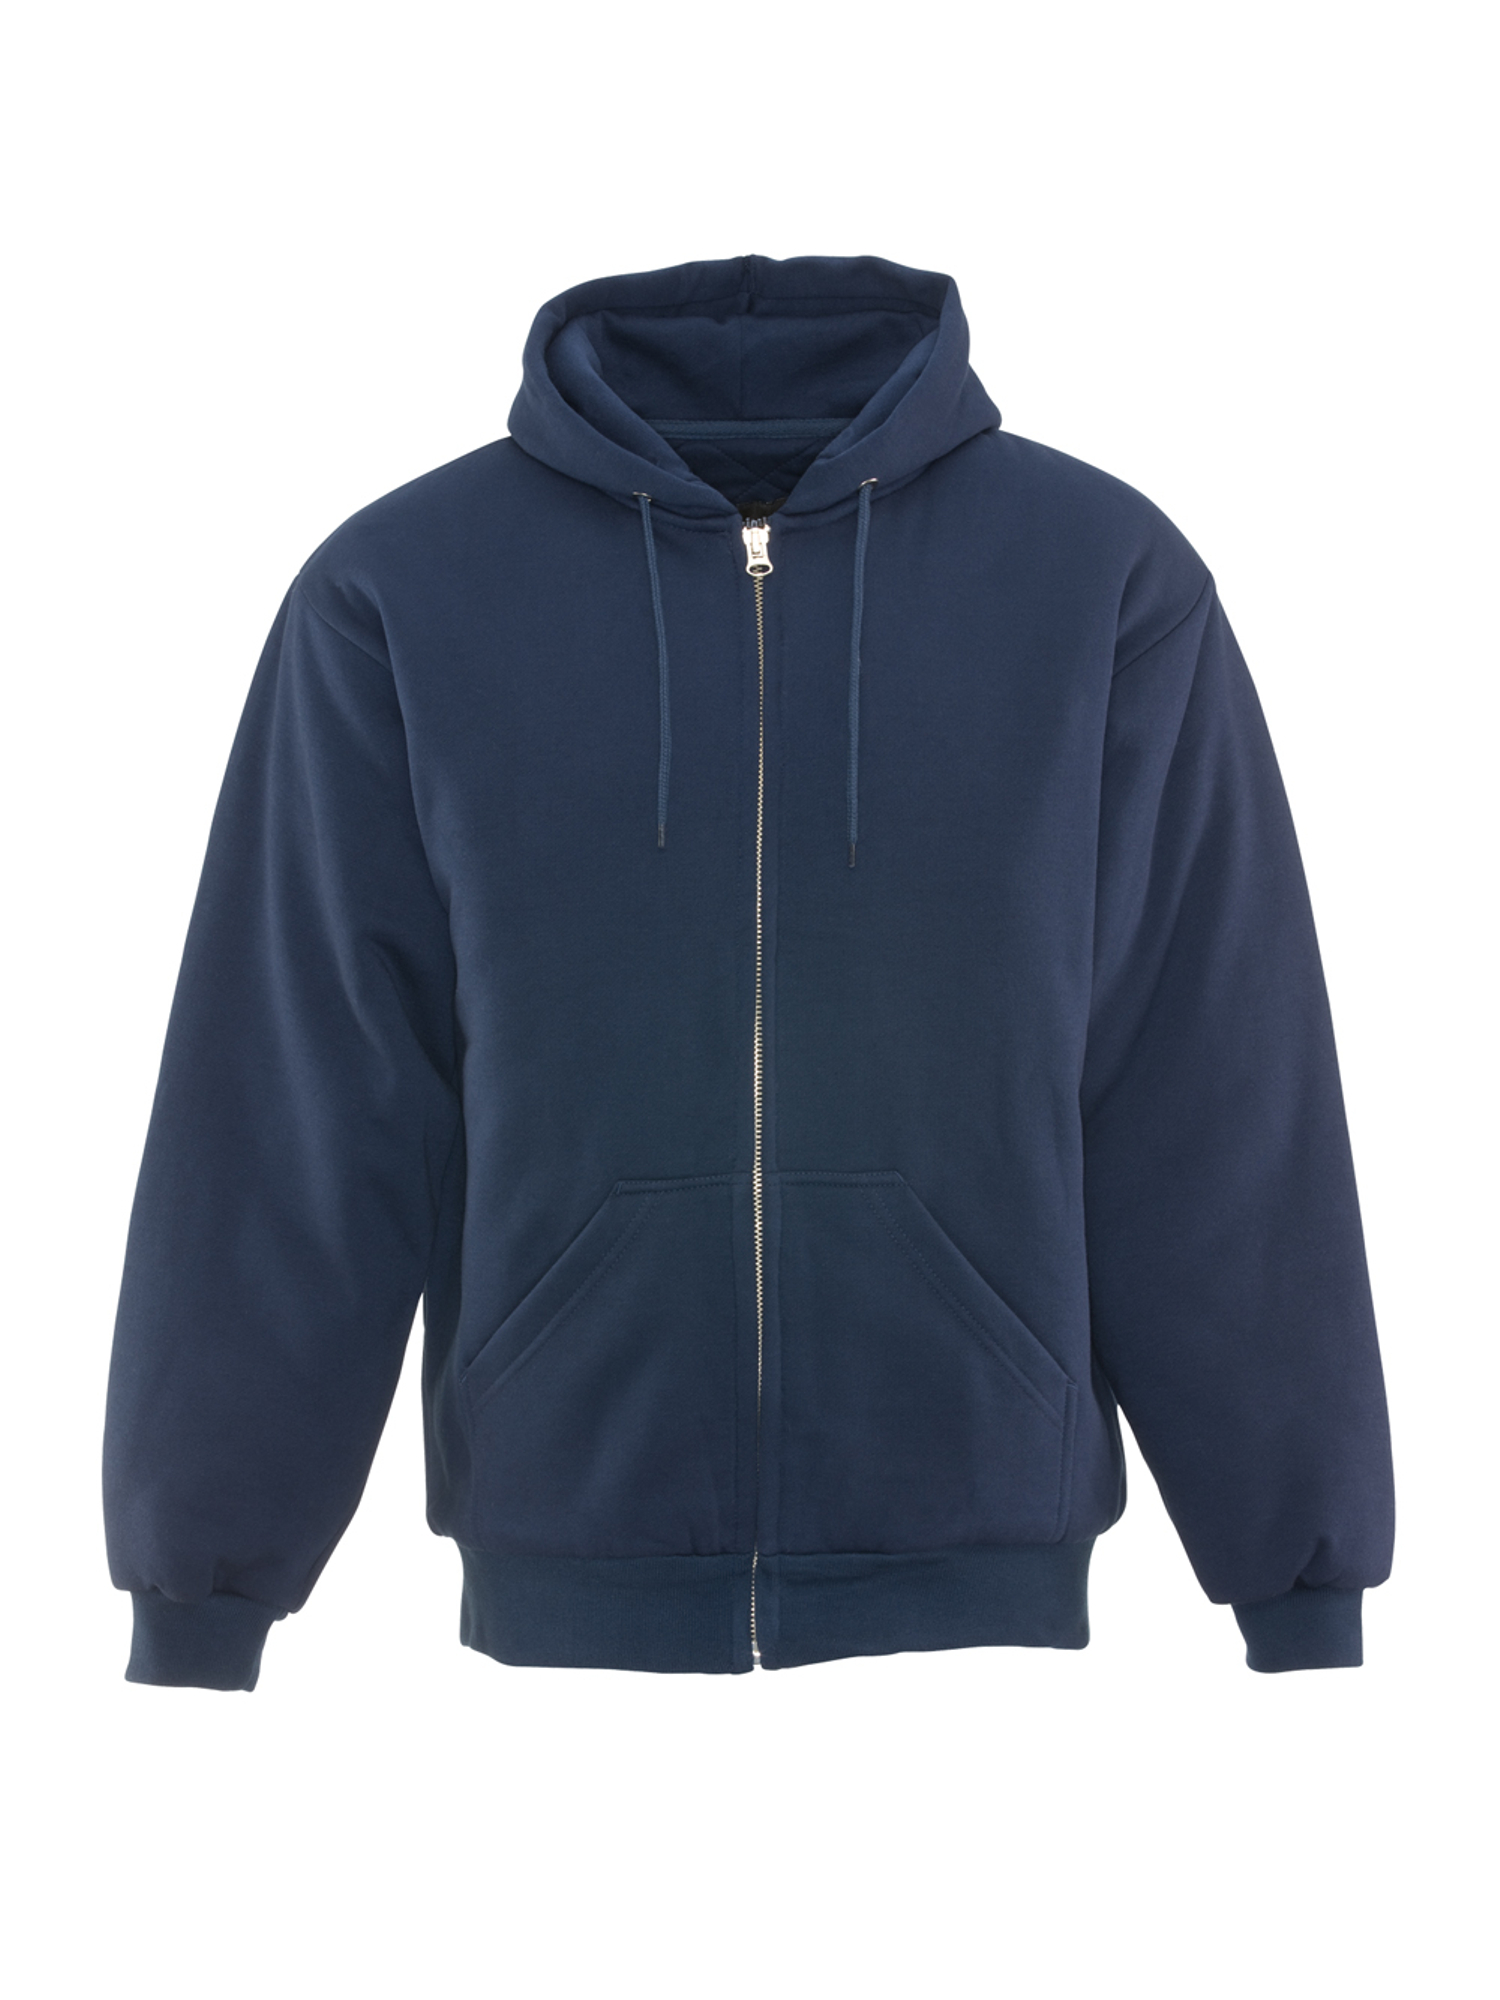 RefrigiWear Insulated Quilted Sweatshirt | Navy | Fit: Big & Tall | Ragg Wool/Polyester/Fabric | S